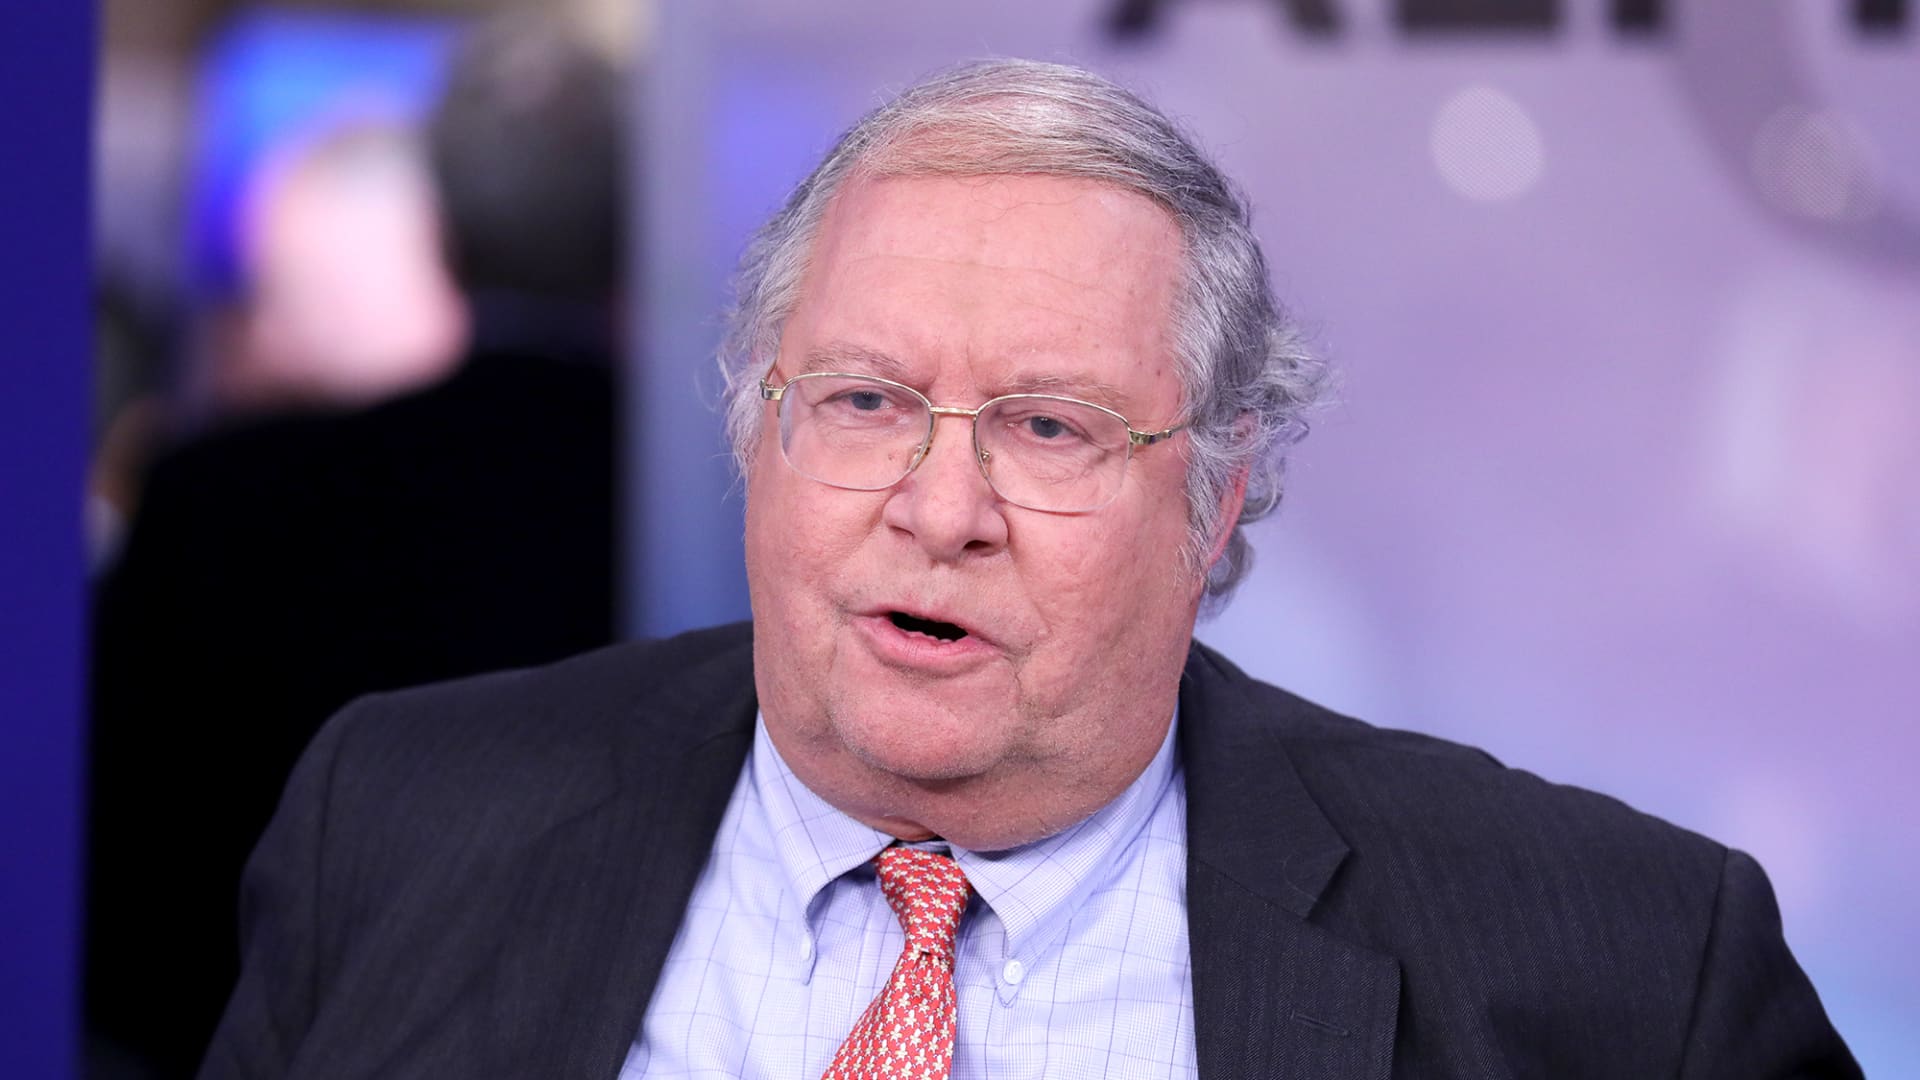 Bill Miller doubles down on Amazon after a rough year, while shorting Tesla increasingly